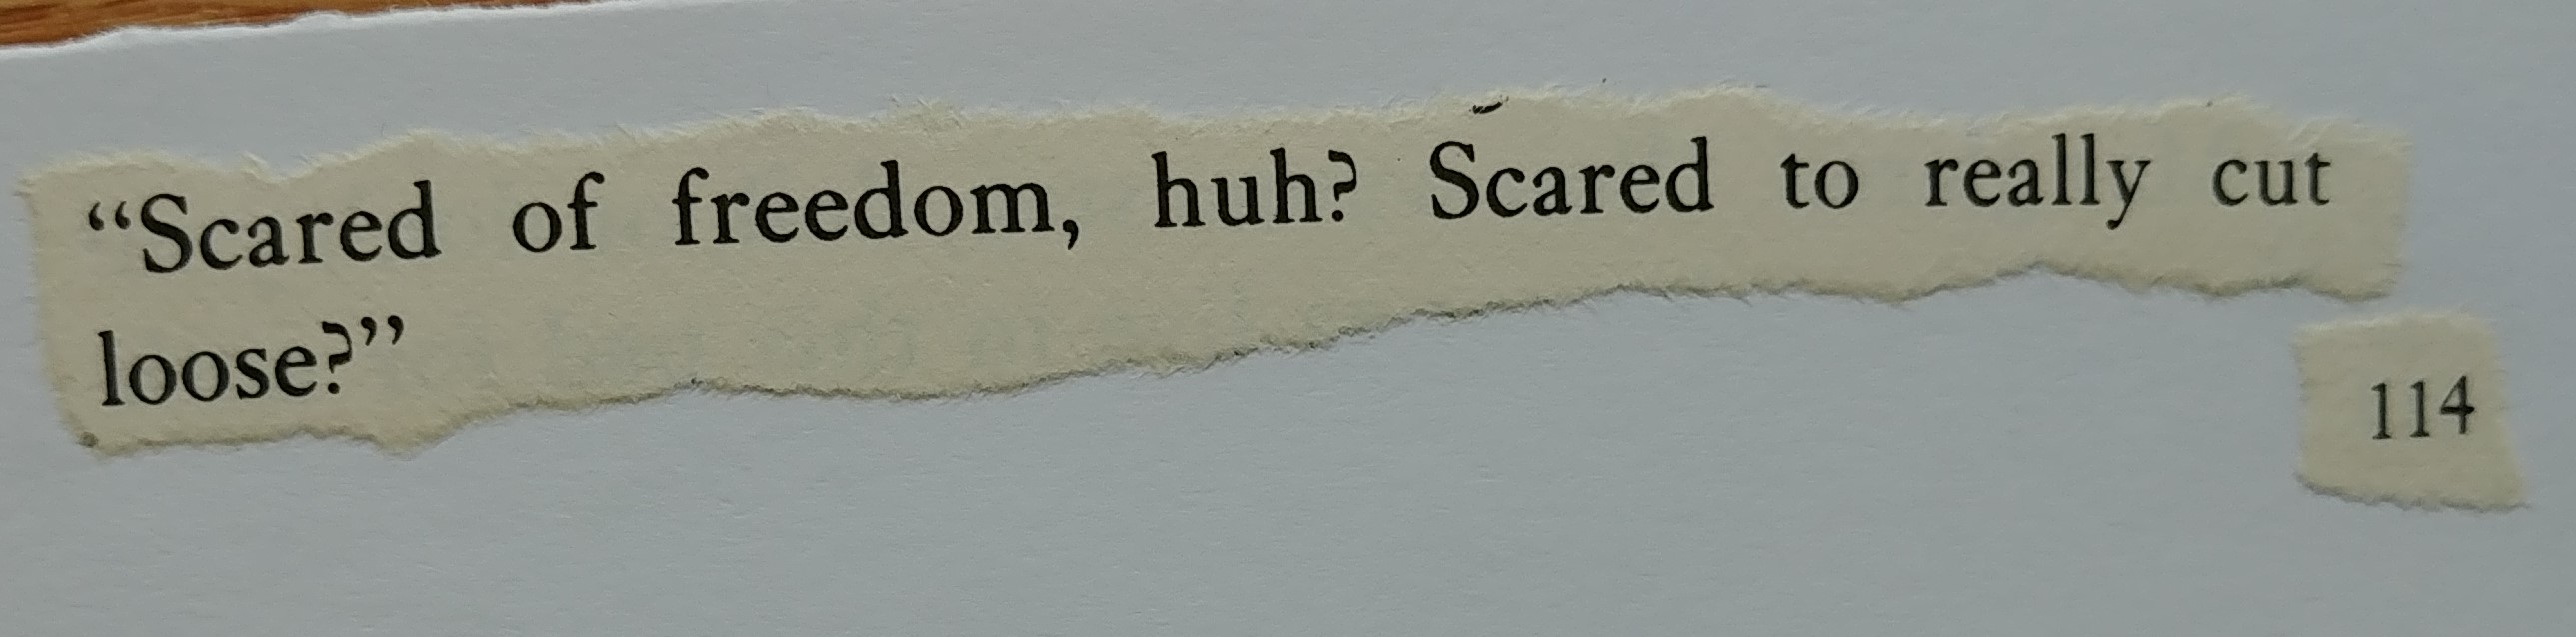 scared
                quote